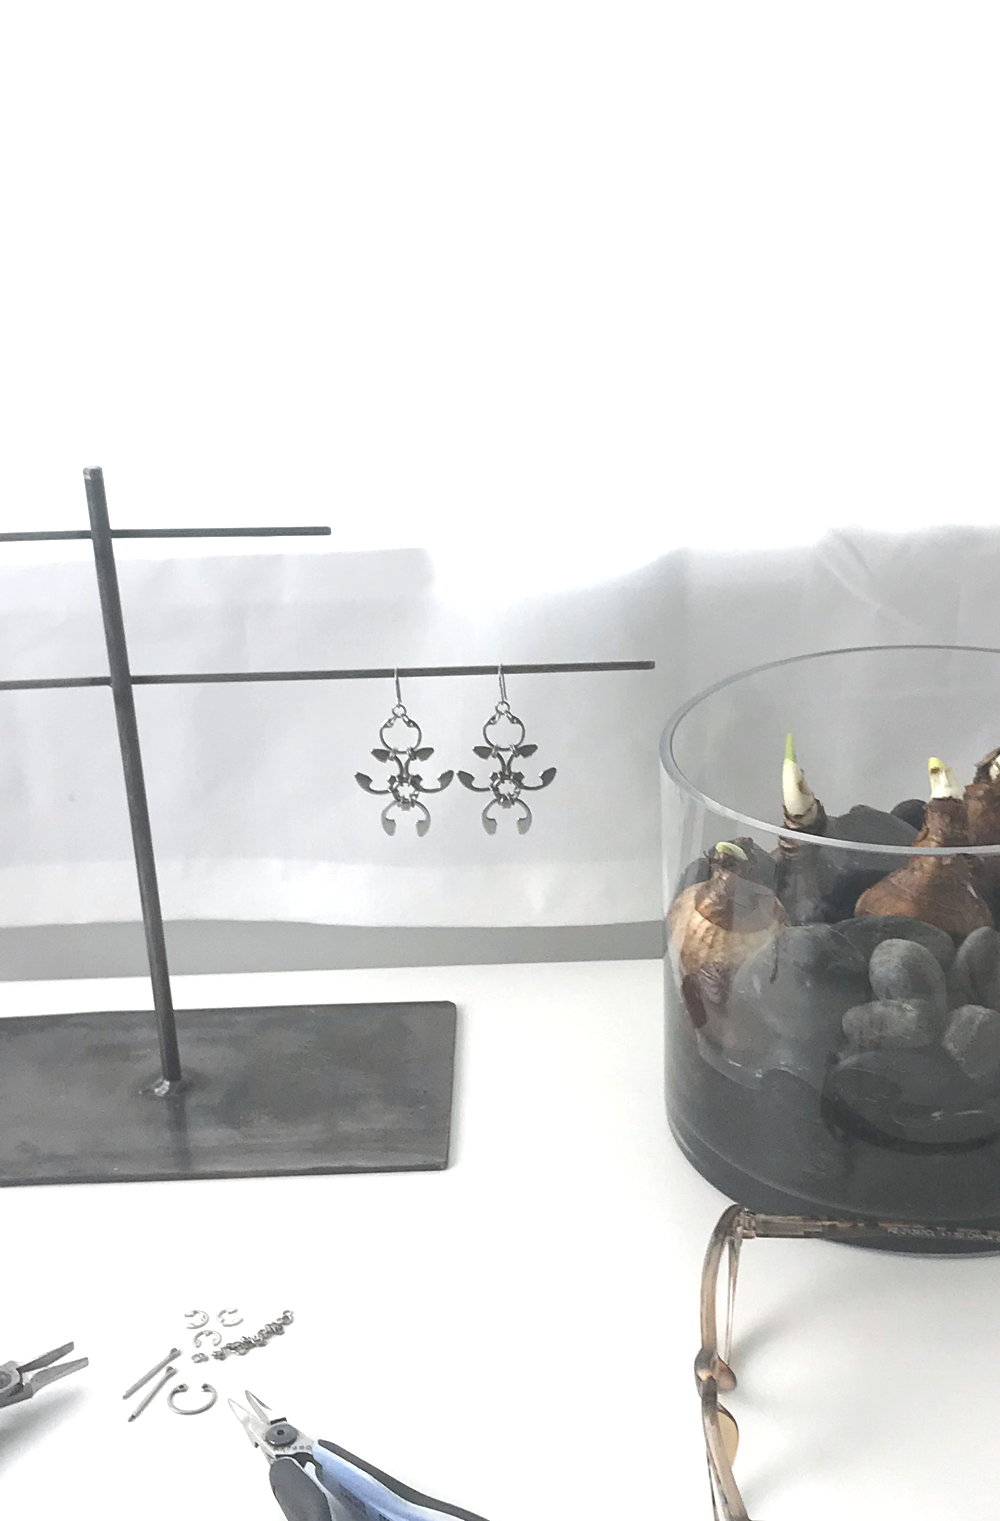 Studio vignette: a white desk in front of a white curtain, with a sneak peek of Wraptillion's jewelry piece in process with pliers, engineering components, and titanium jump rings, next to leopard reading glasses, a jewelry stand with Wraptillion's spiky abstract statement Garland Earrings and a cylindrical glass vase with black rocks and paperwhite narcissus bulbs just beginning to sprout